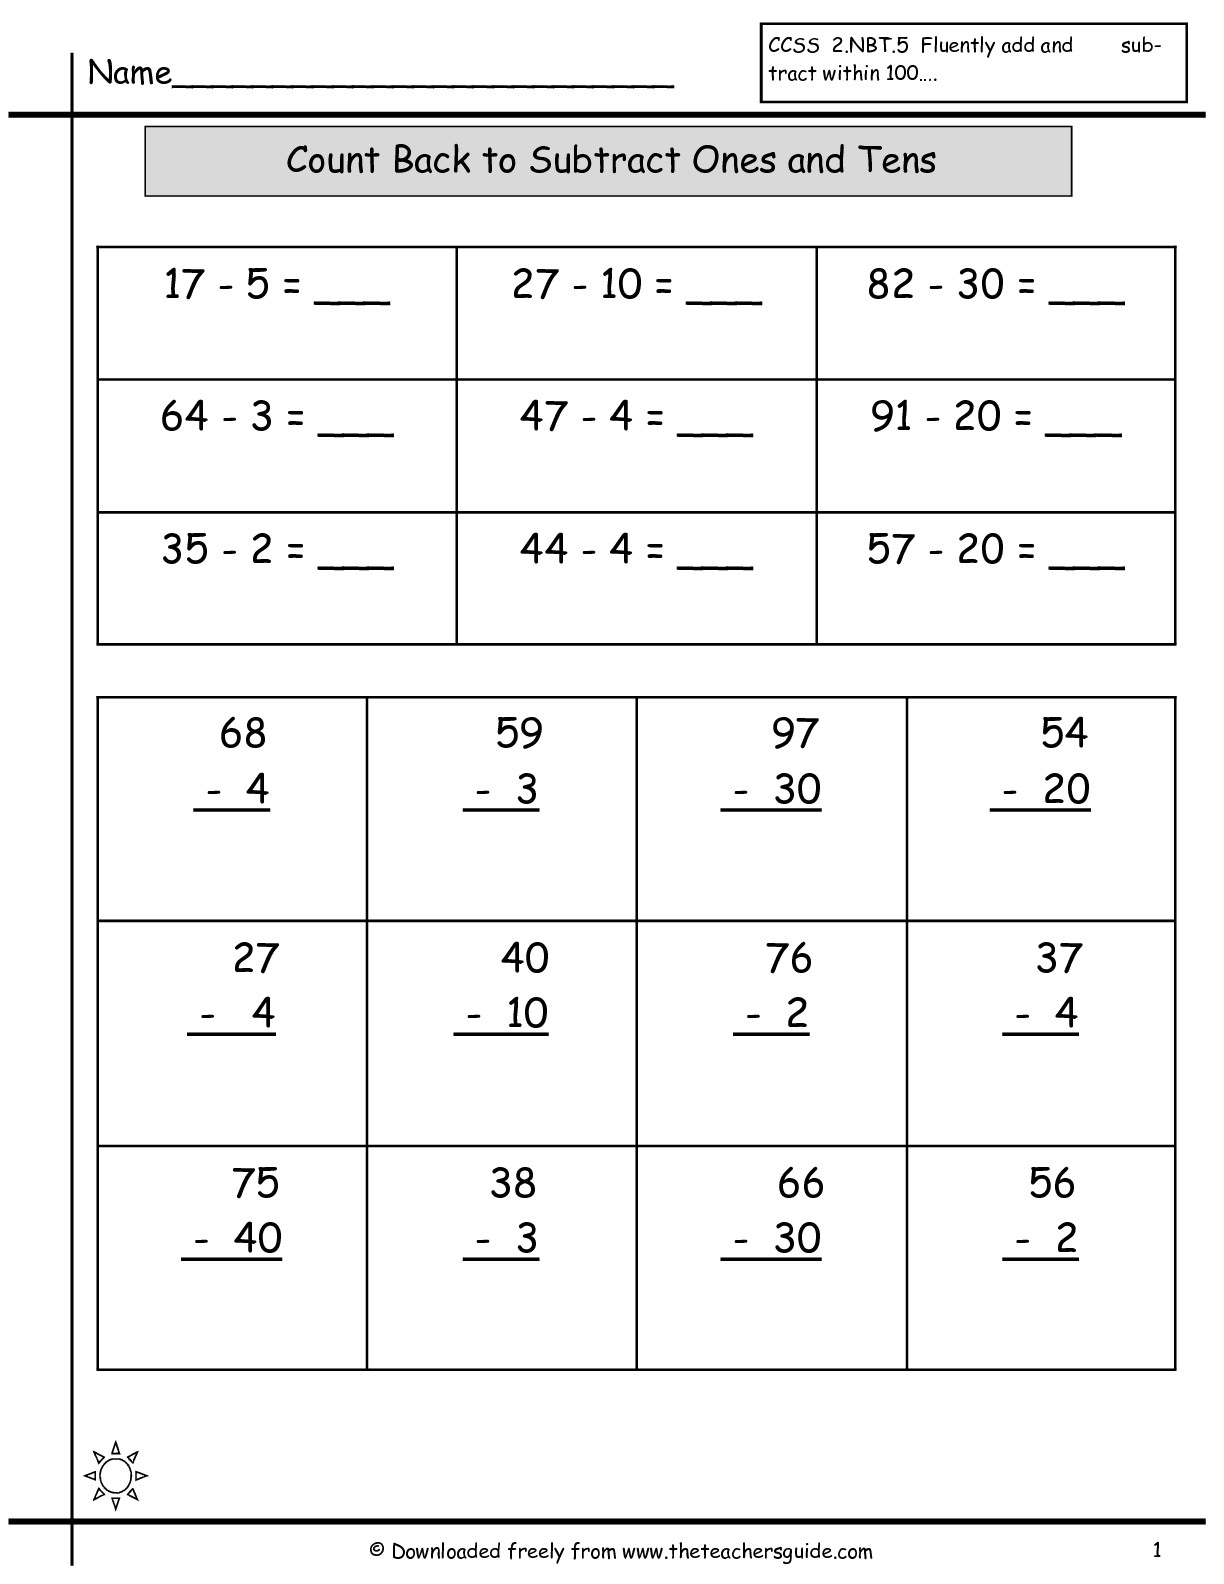 15 Best Images of Adding Hundreds Worksheets - Adding Two Digit Numbers